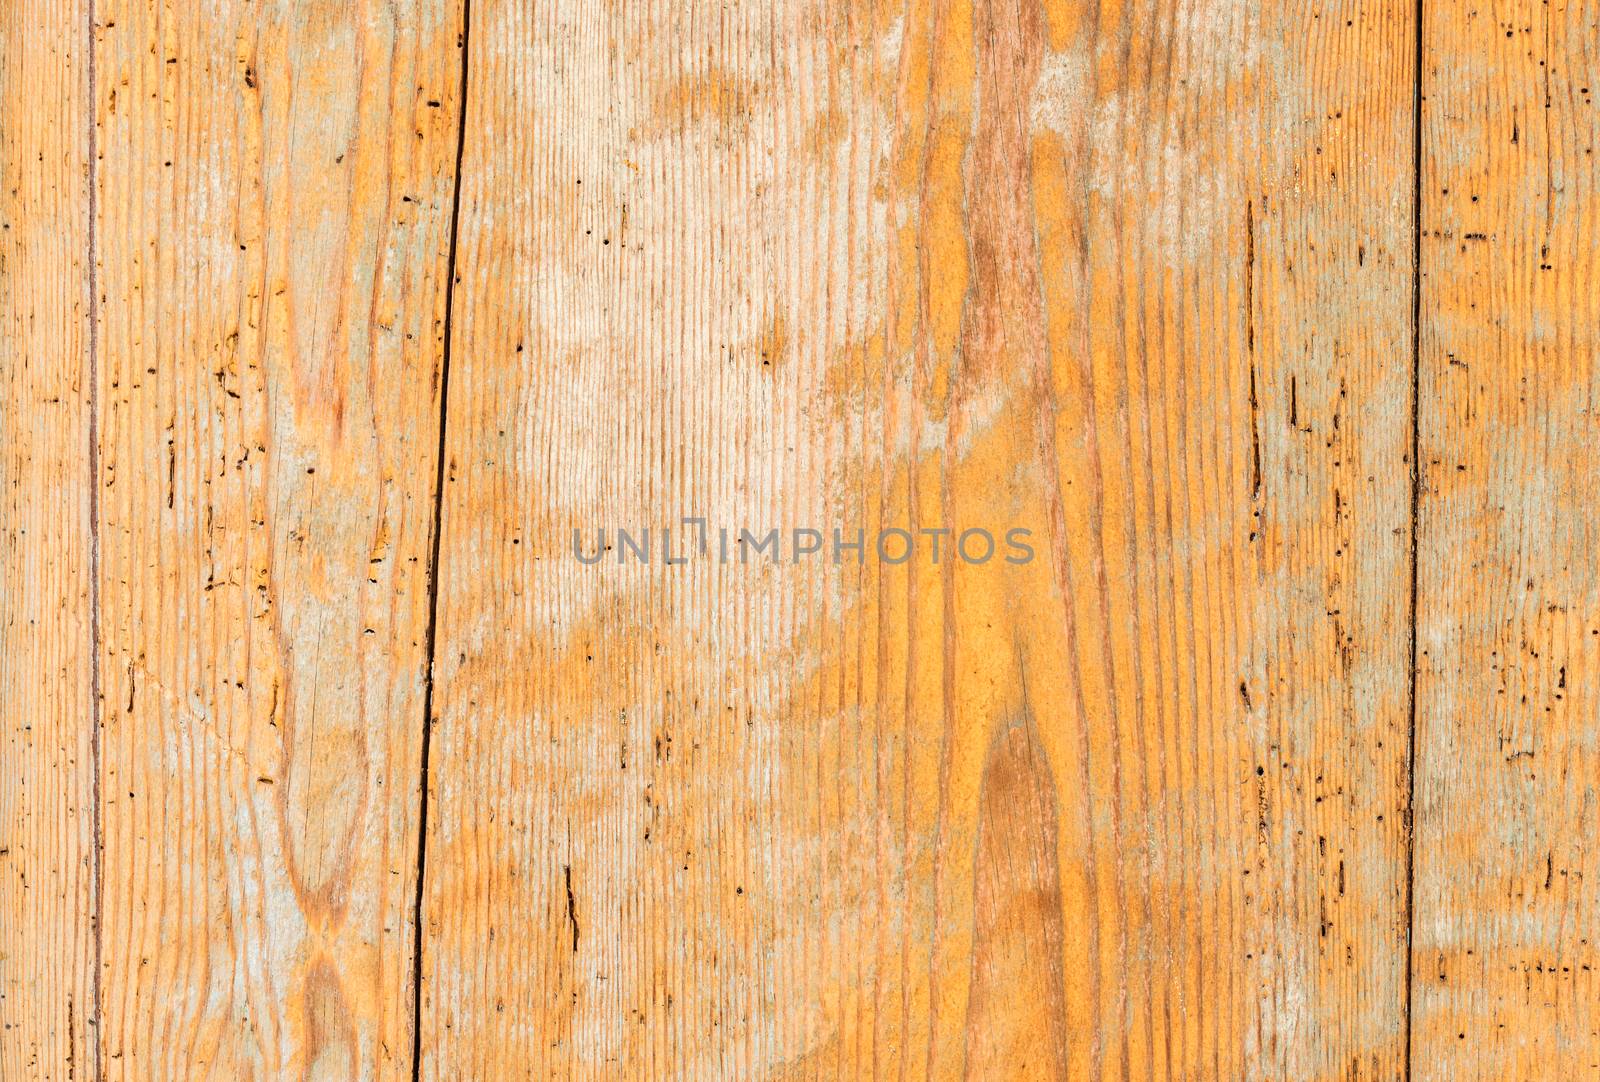 Vintage wooden planks background texture with copy space